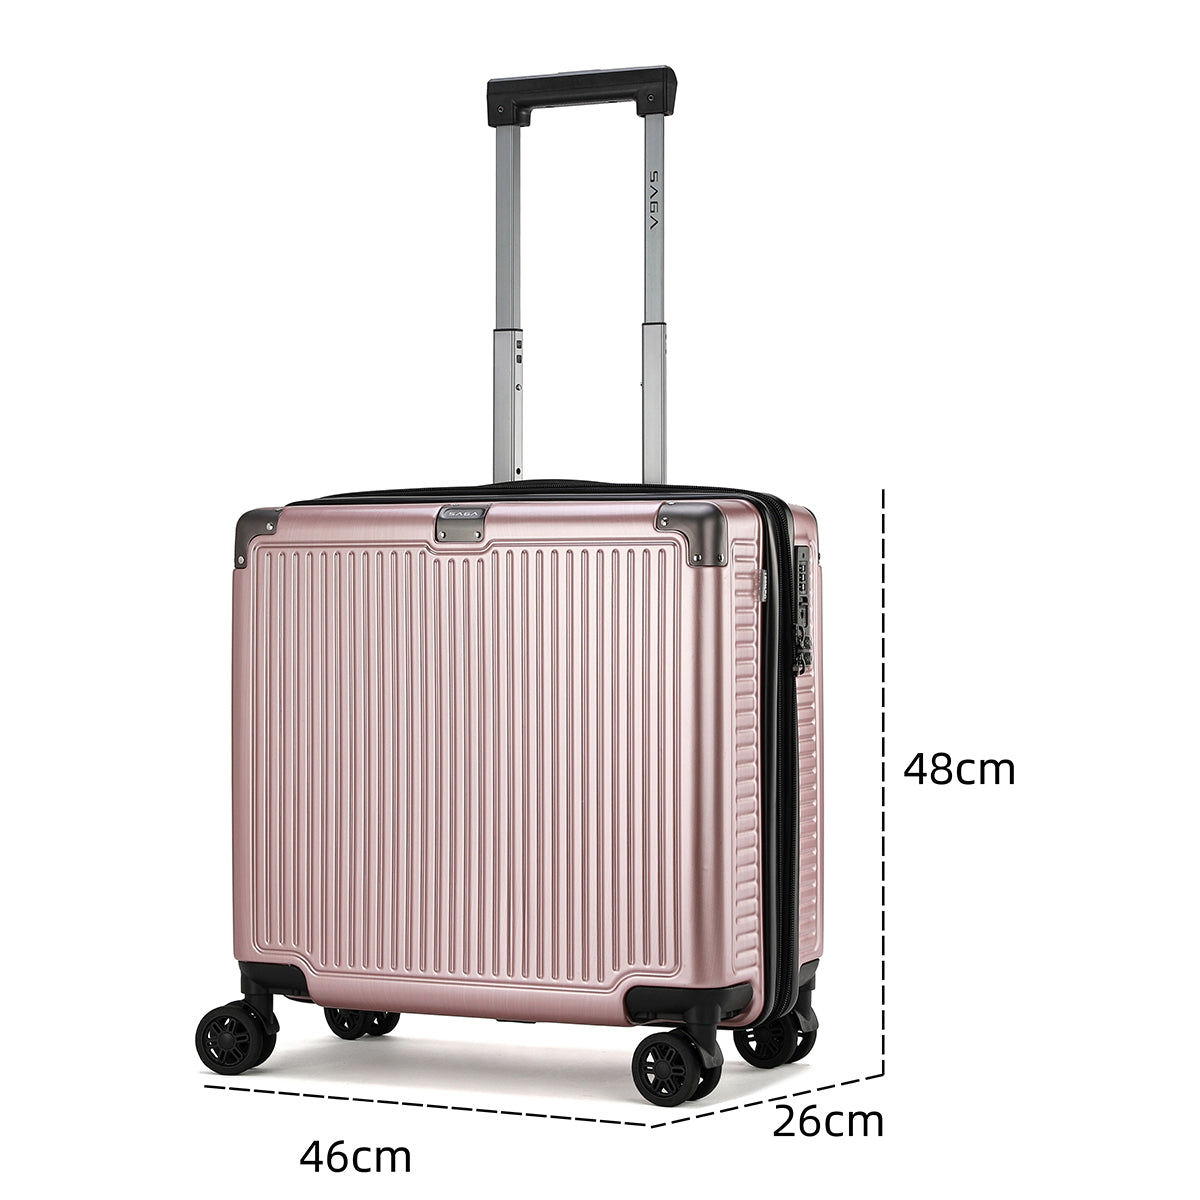 A set of 4 polycarbonate travel bags, great durability, bold design, pink color